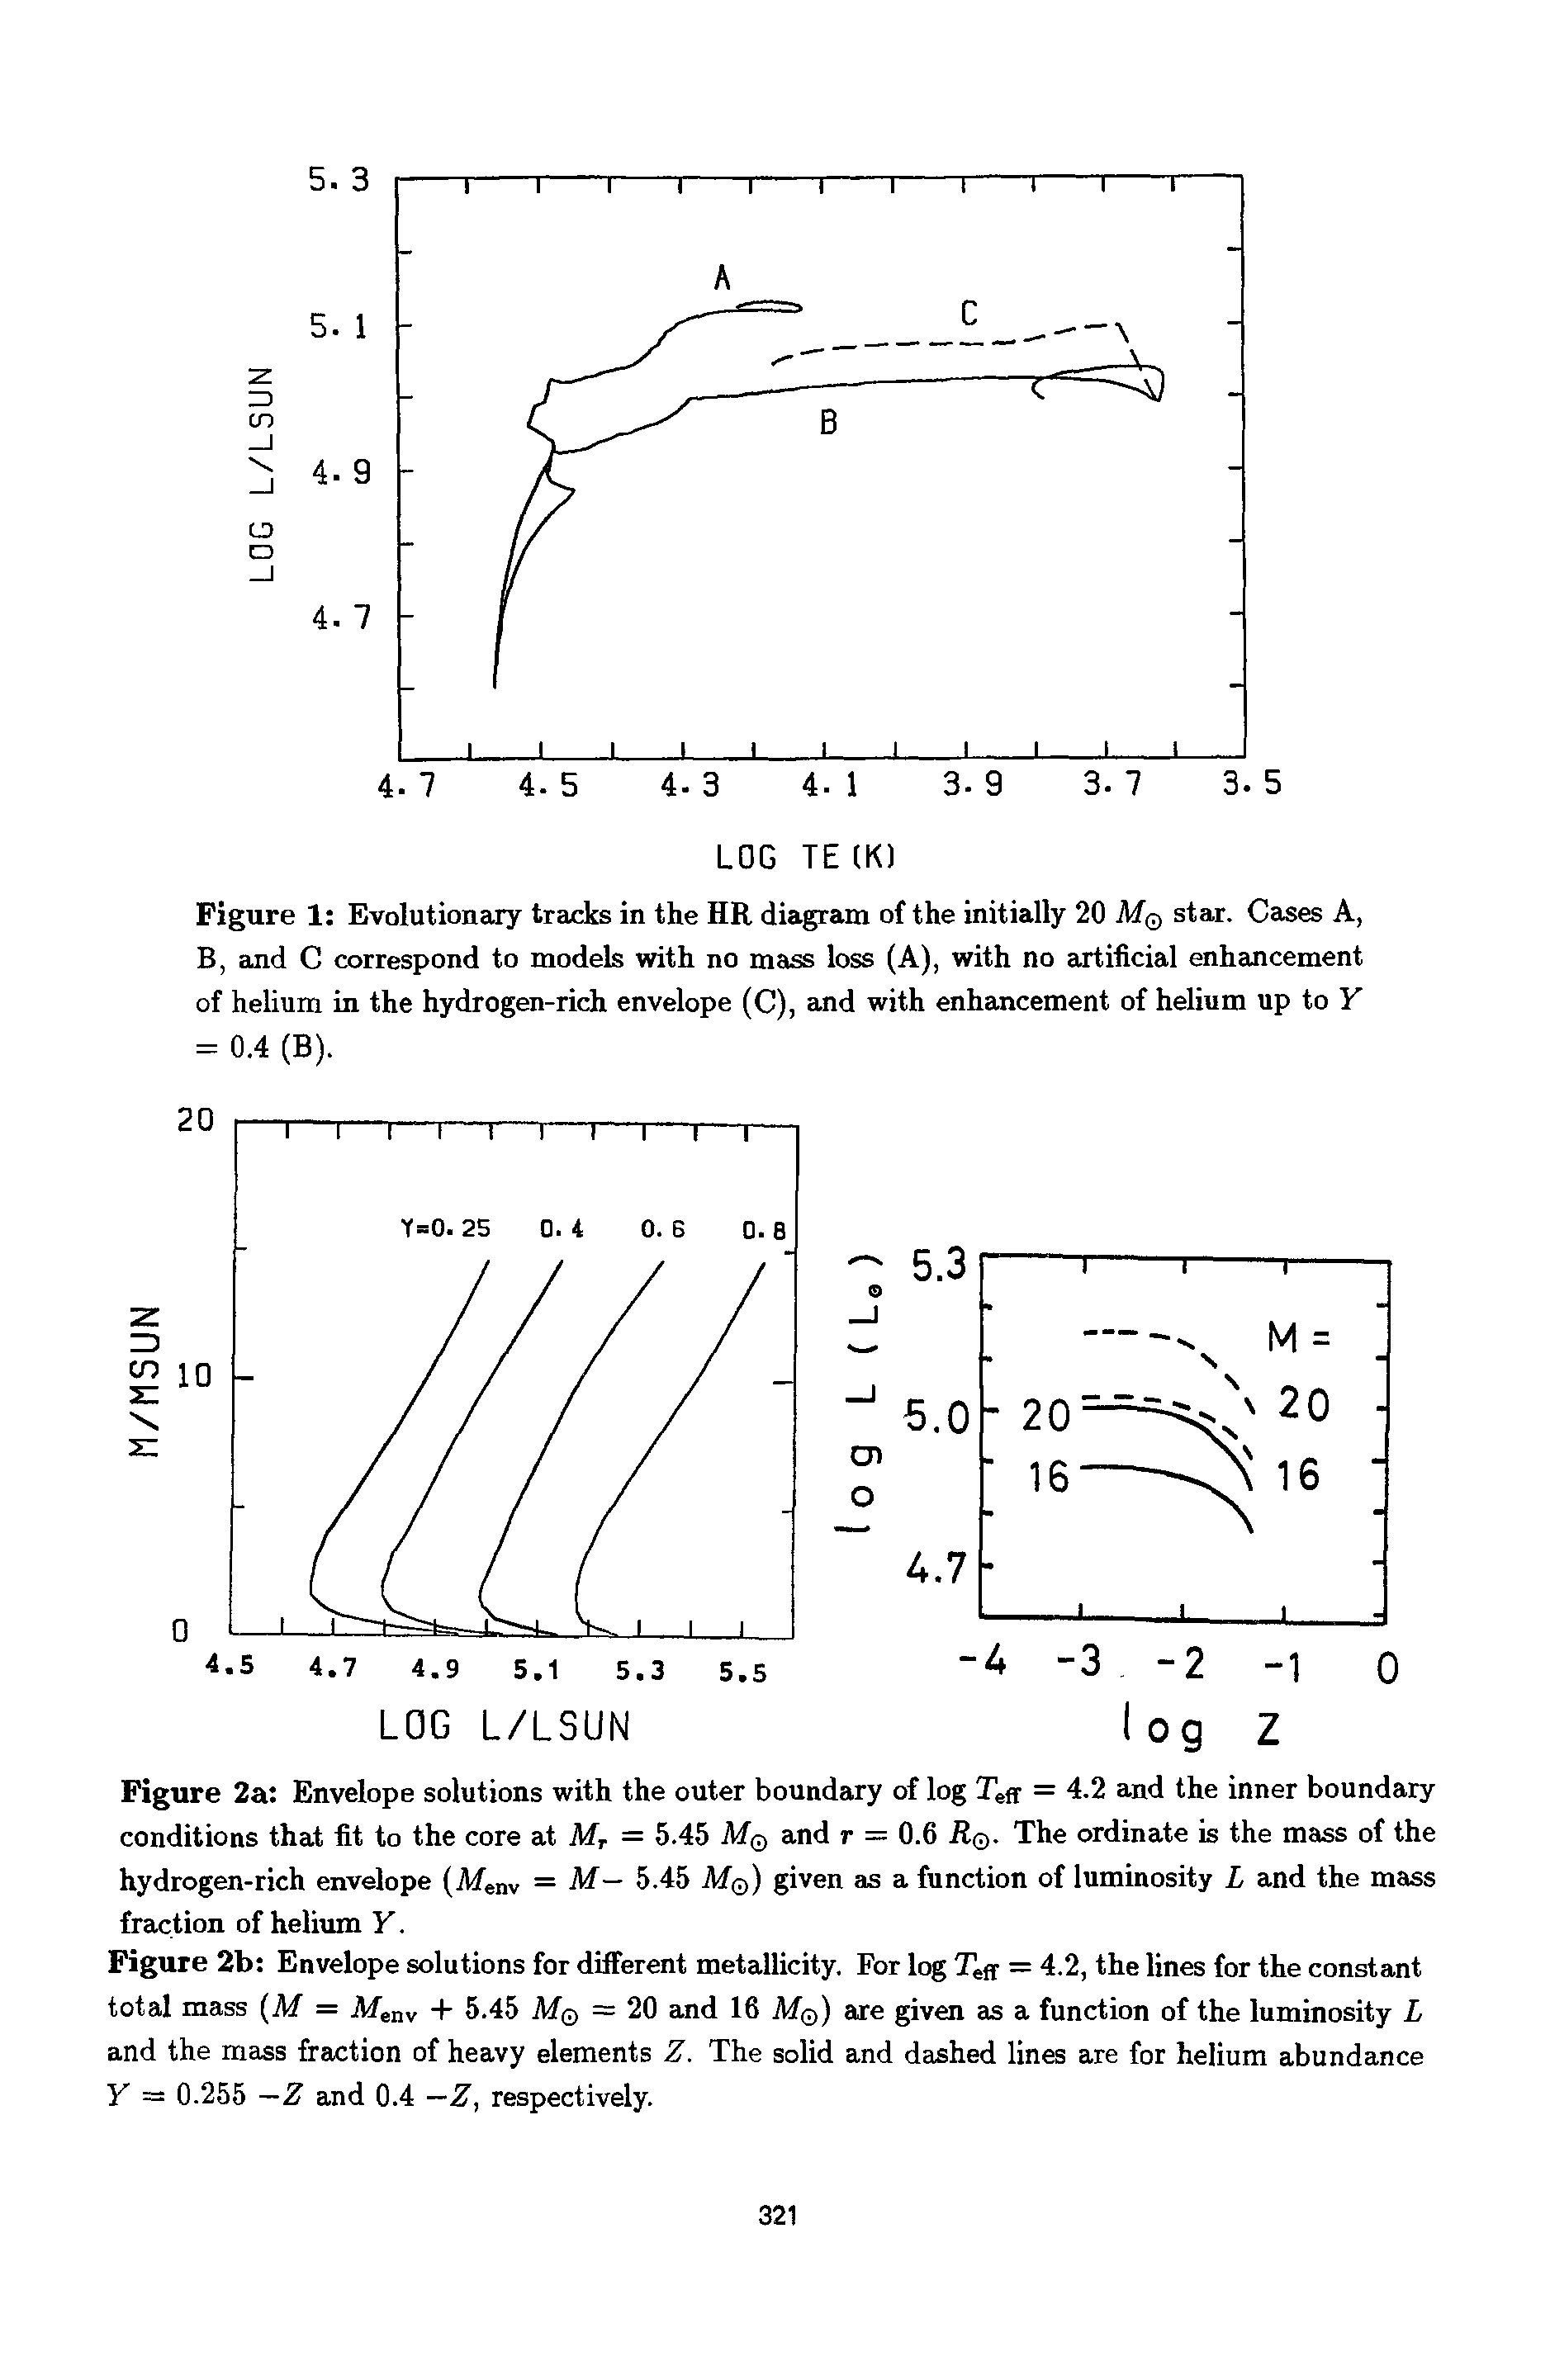 Figure 2b Envelope solutions for different metallicity. For log Teff = 4.2, the lines for the constant total mass (M = Menv + 5.45 M = 20 and 16 M ) are given as a function of the luminosity L and the mass fraction of heavy elements Z. The solid and dashed lines are for helium abundance Y = 0.255 — Z and 0.4 —Z, respectively.